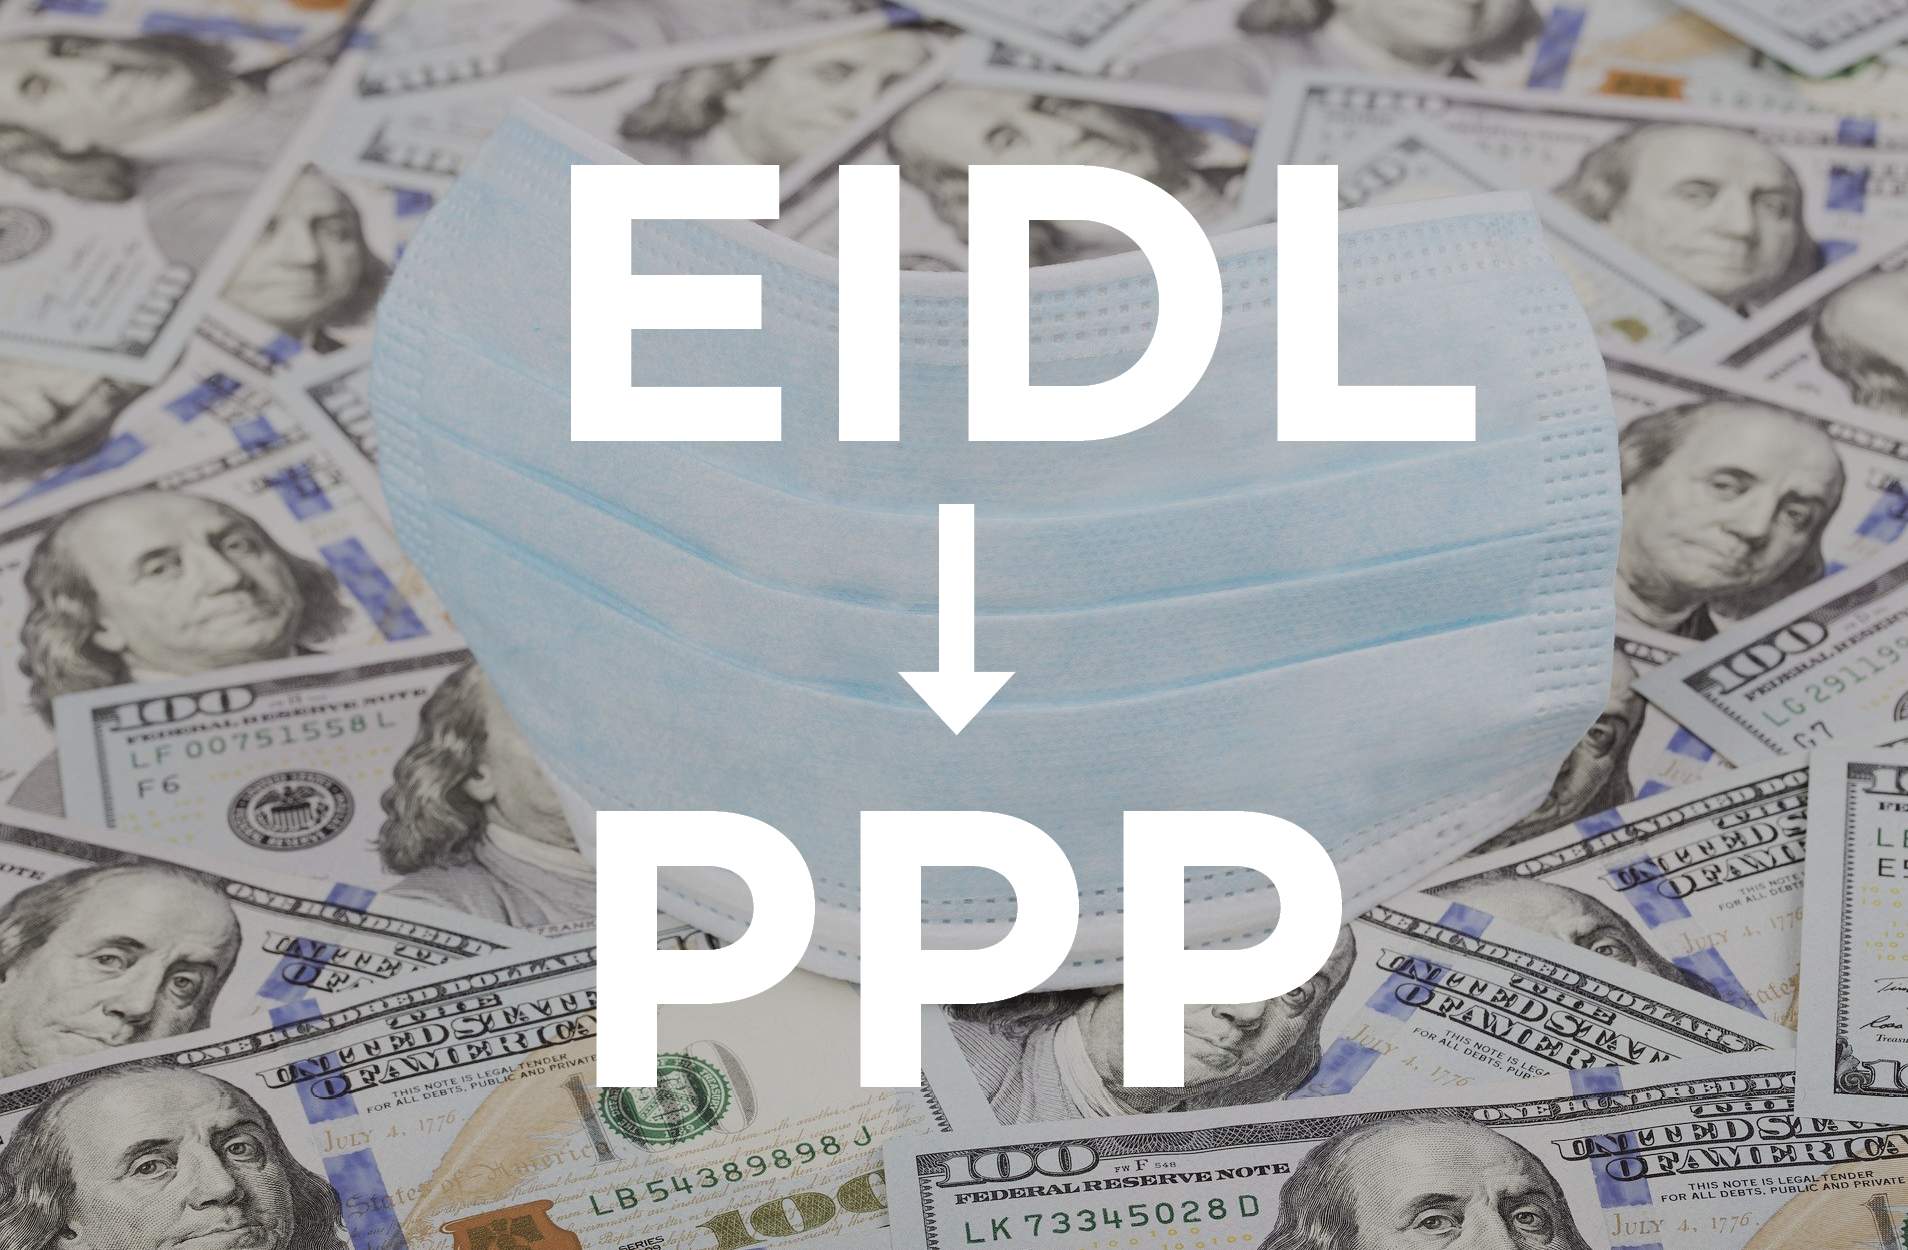 How the PPP and EIDL Will Affect Your 2020 Taxes